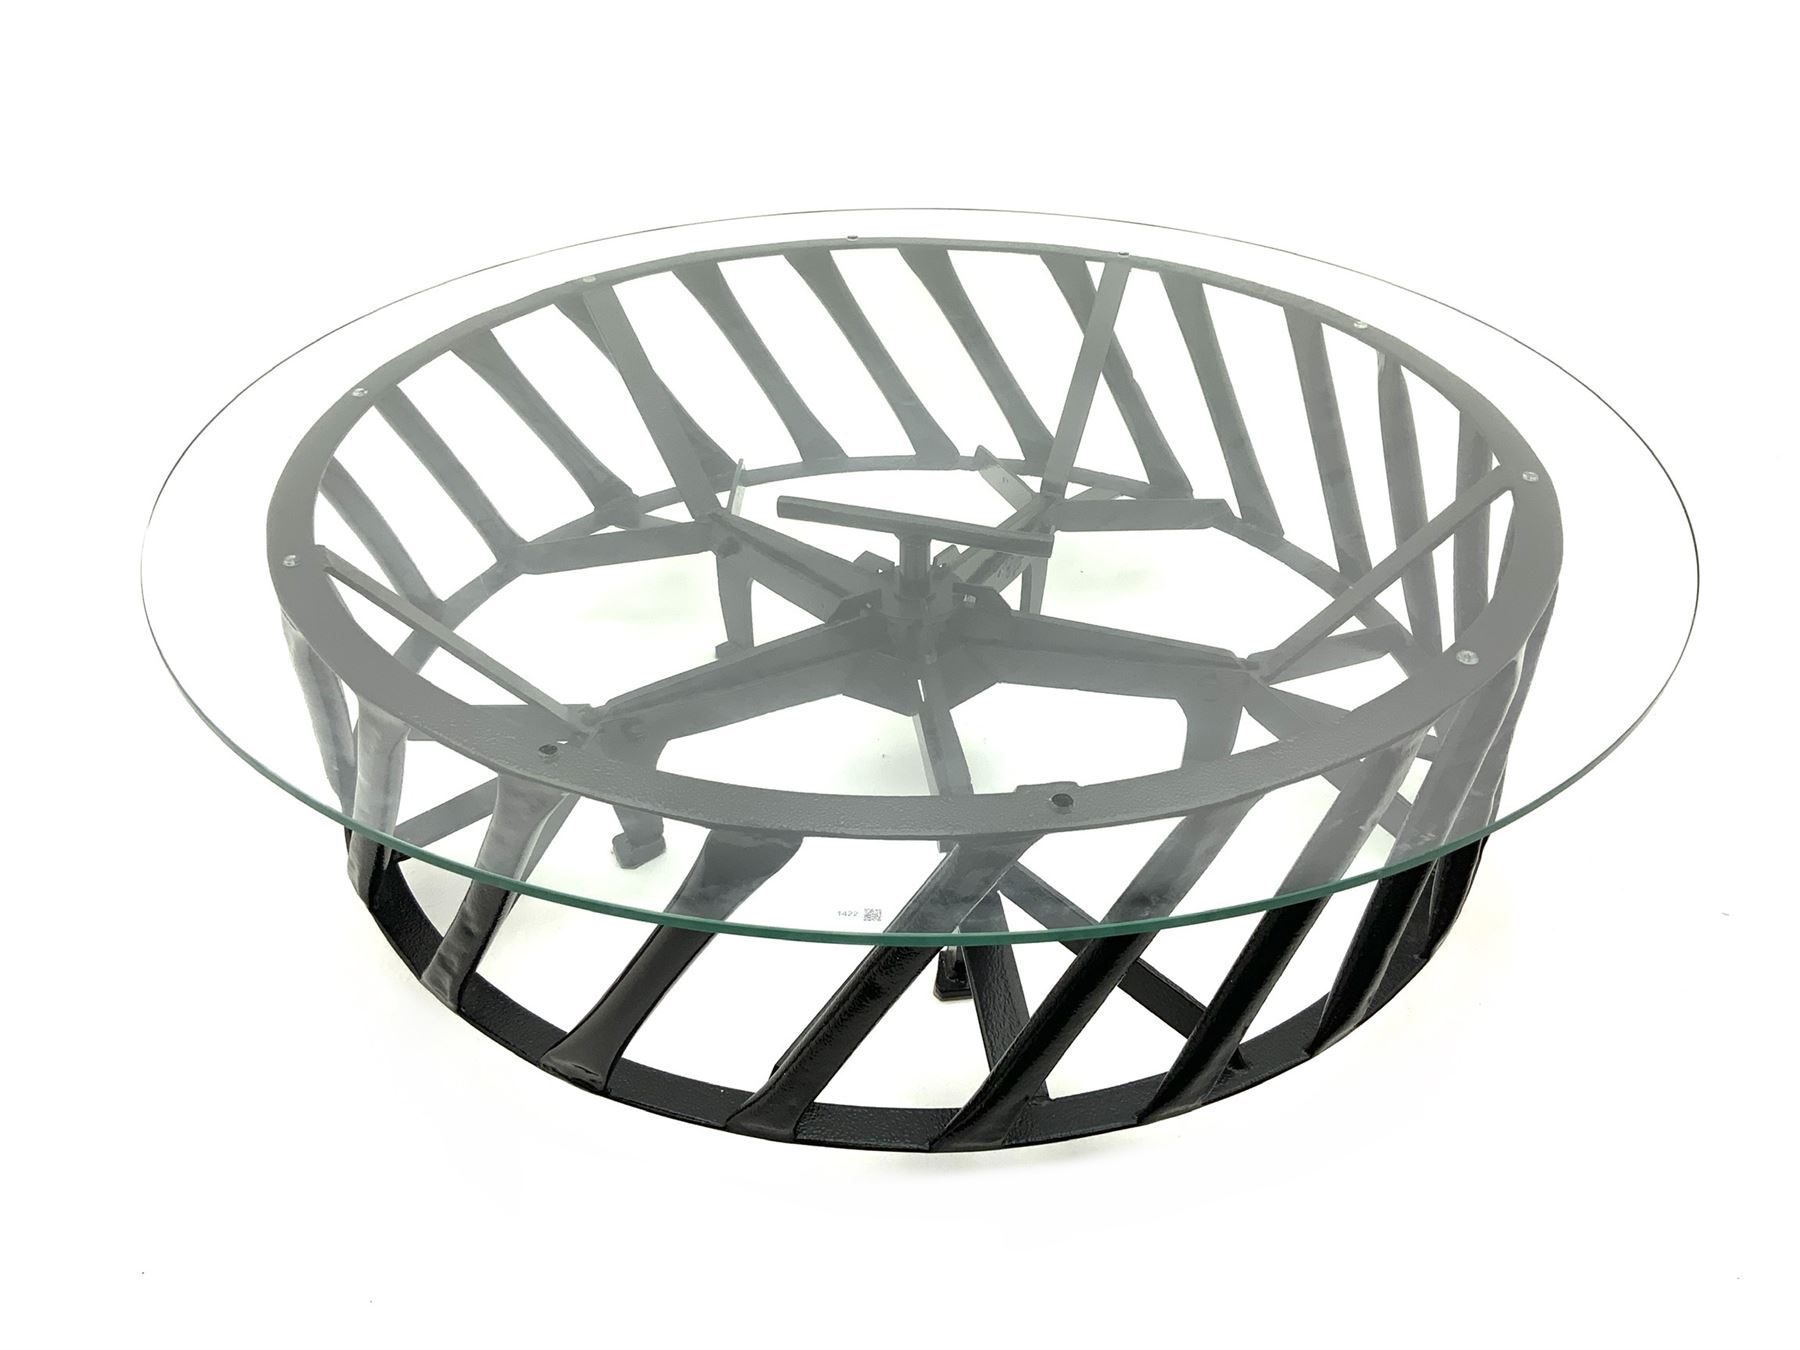 Reclaimed wrought iron vintage agricultural wheel coffee table with circular glass top - Image 2 of 3